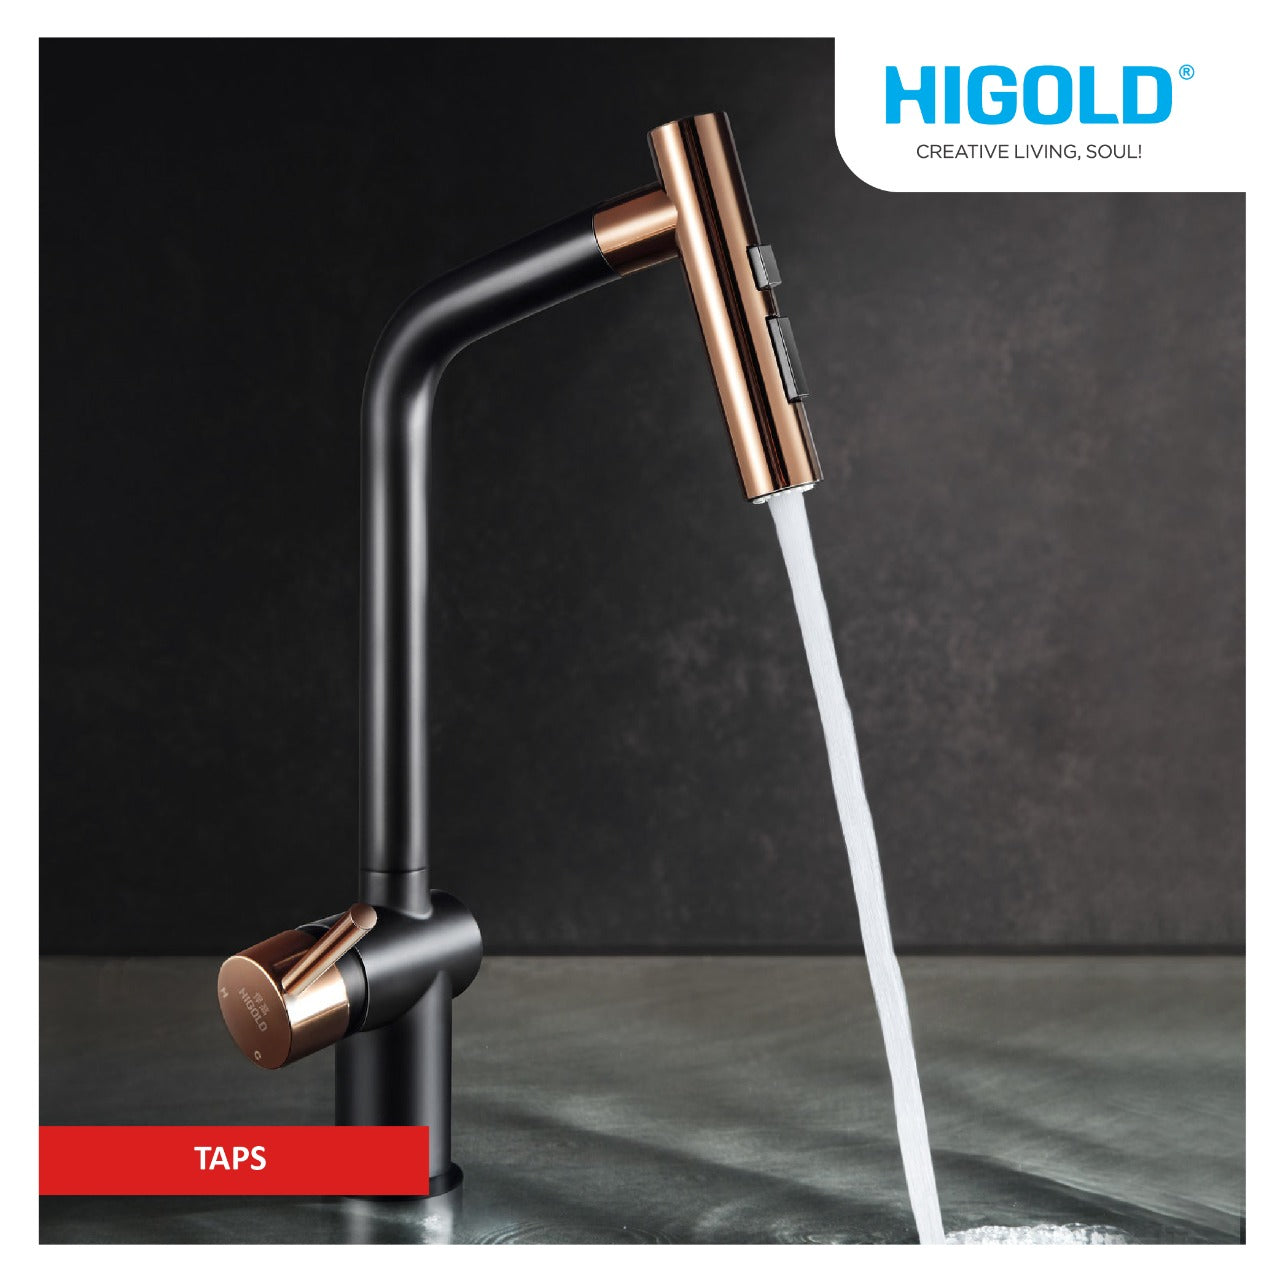 Higold Taps - Elevate your kitchen and bathroom with premium quality and stylish designs - M. M. Noorbhoy & Co.